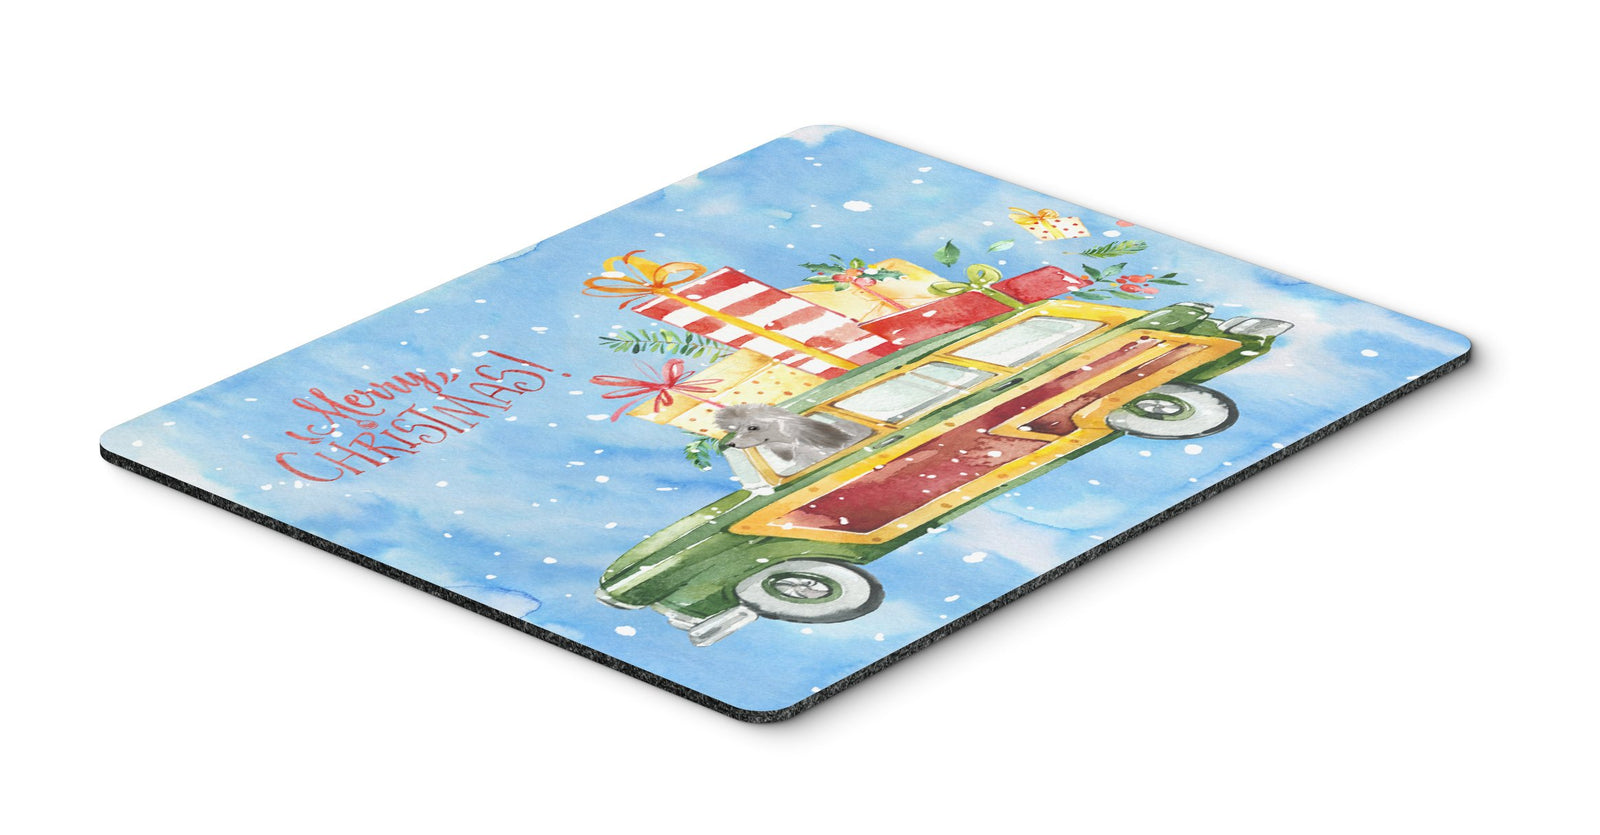 Merry Christmas Silver Poodle Mouse Pad, Hot Pad or Trivet CK2457MP by Caroline's Treasures